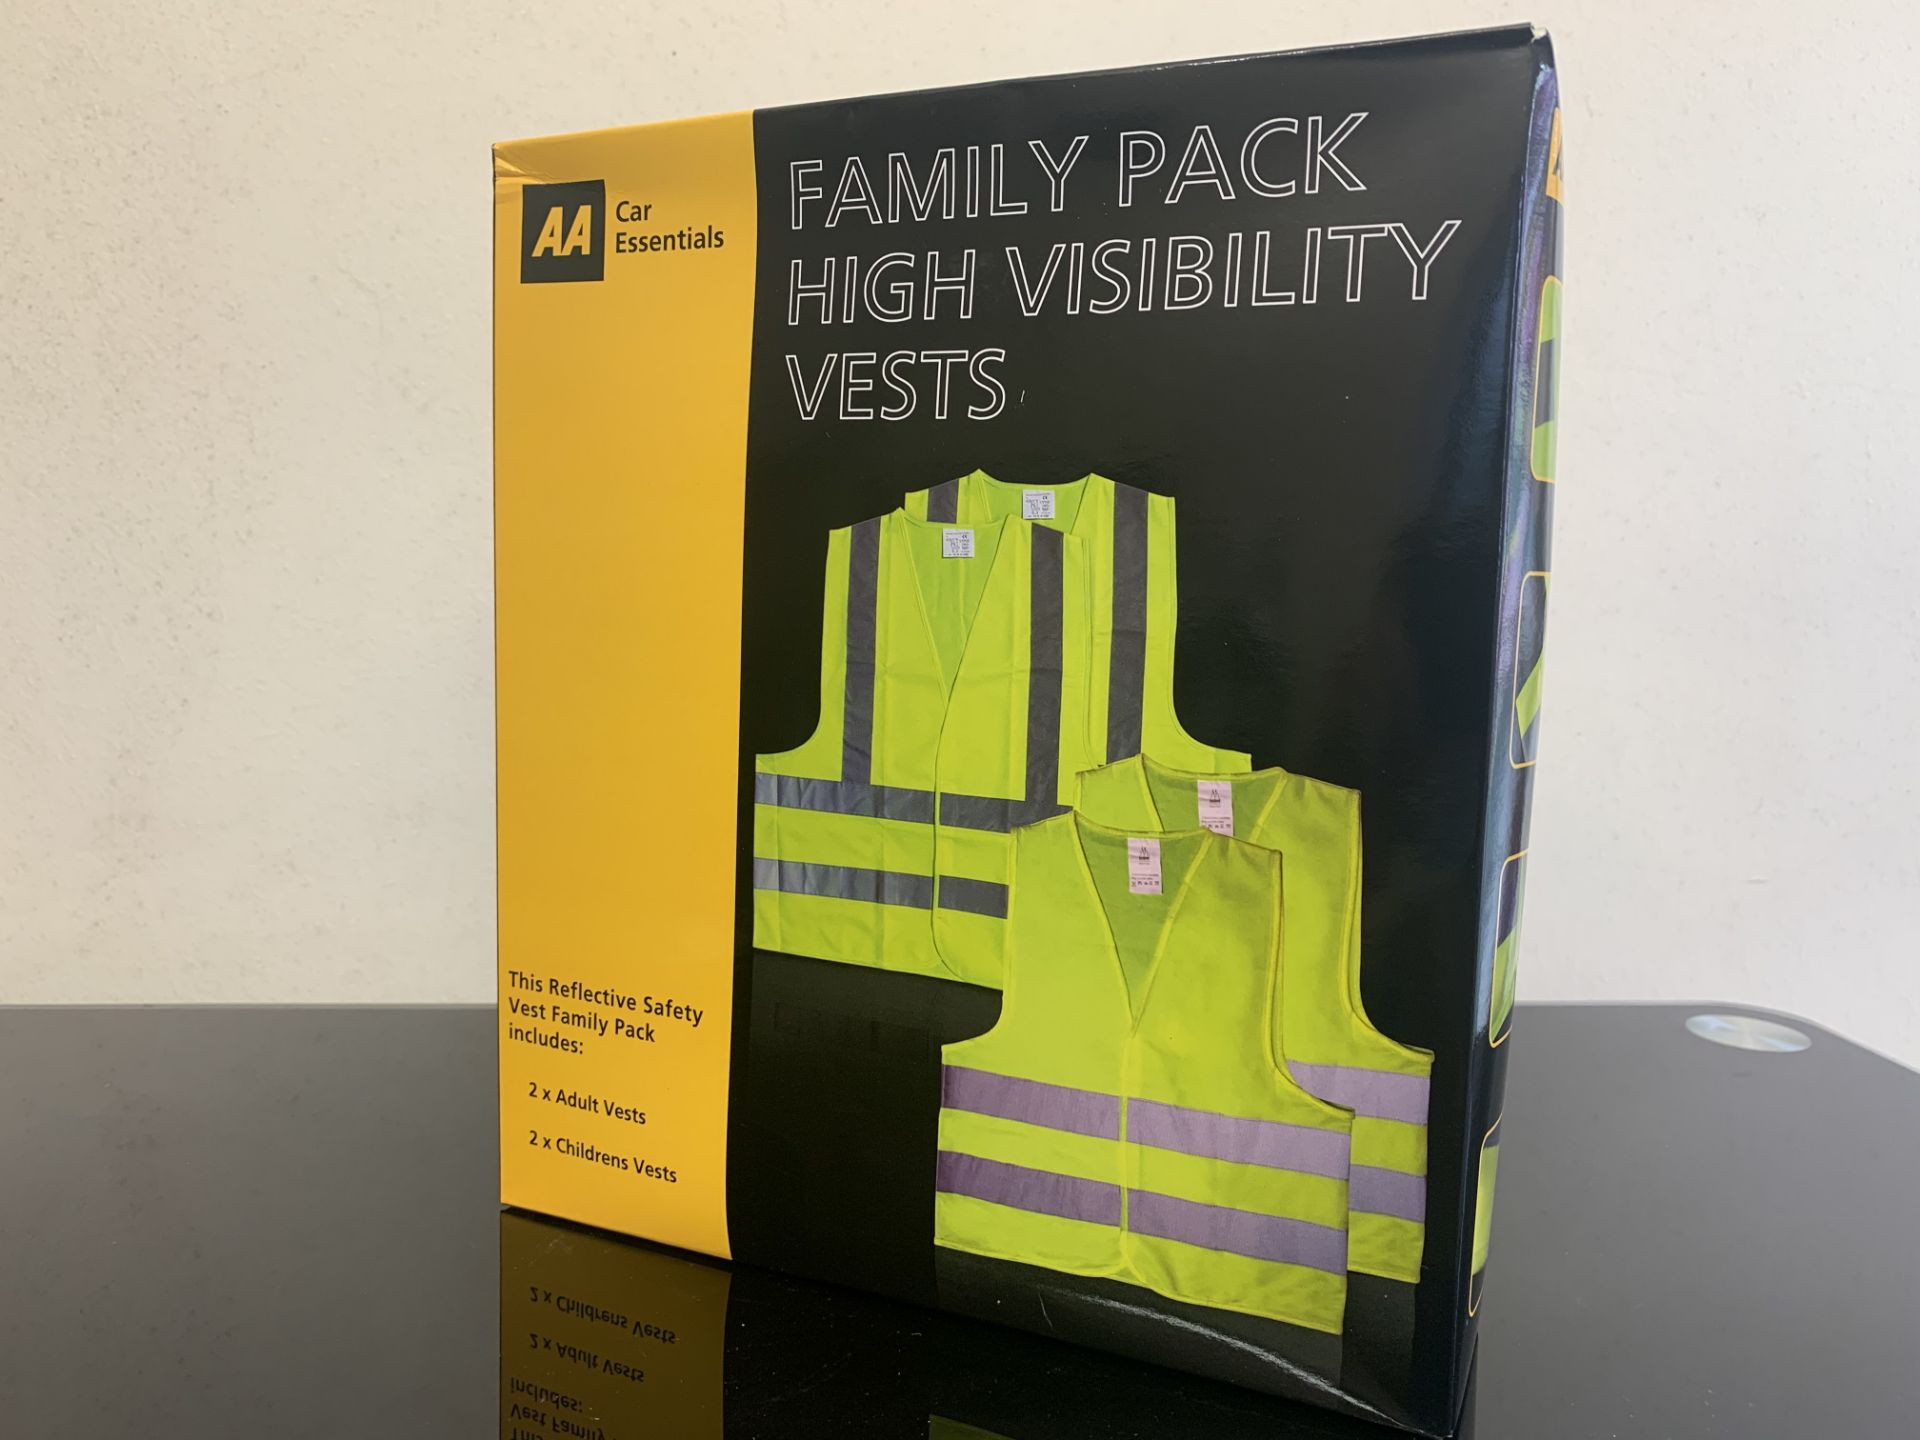 28 X AA CAR ESSENTIALS FAMILY PACK HIGH VISIBILITY VESTS IN 7 BOXES